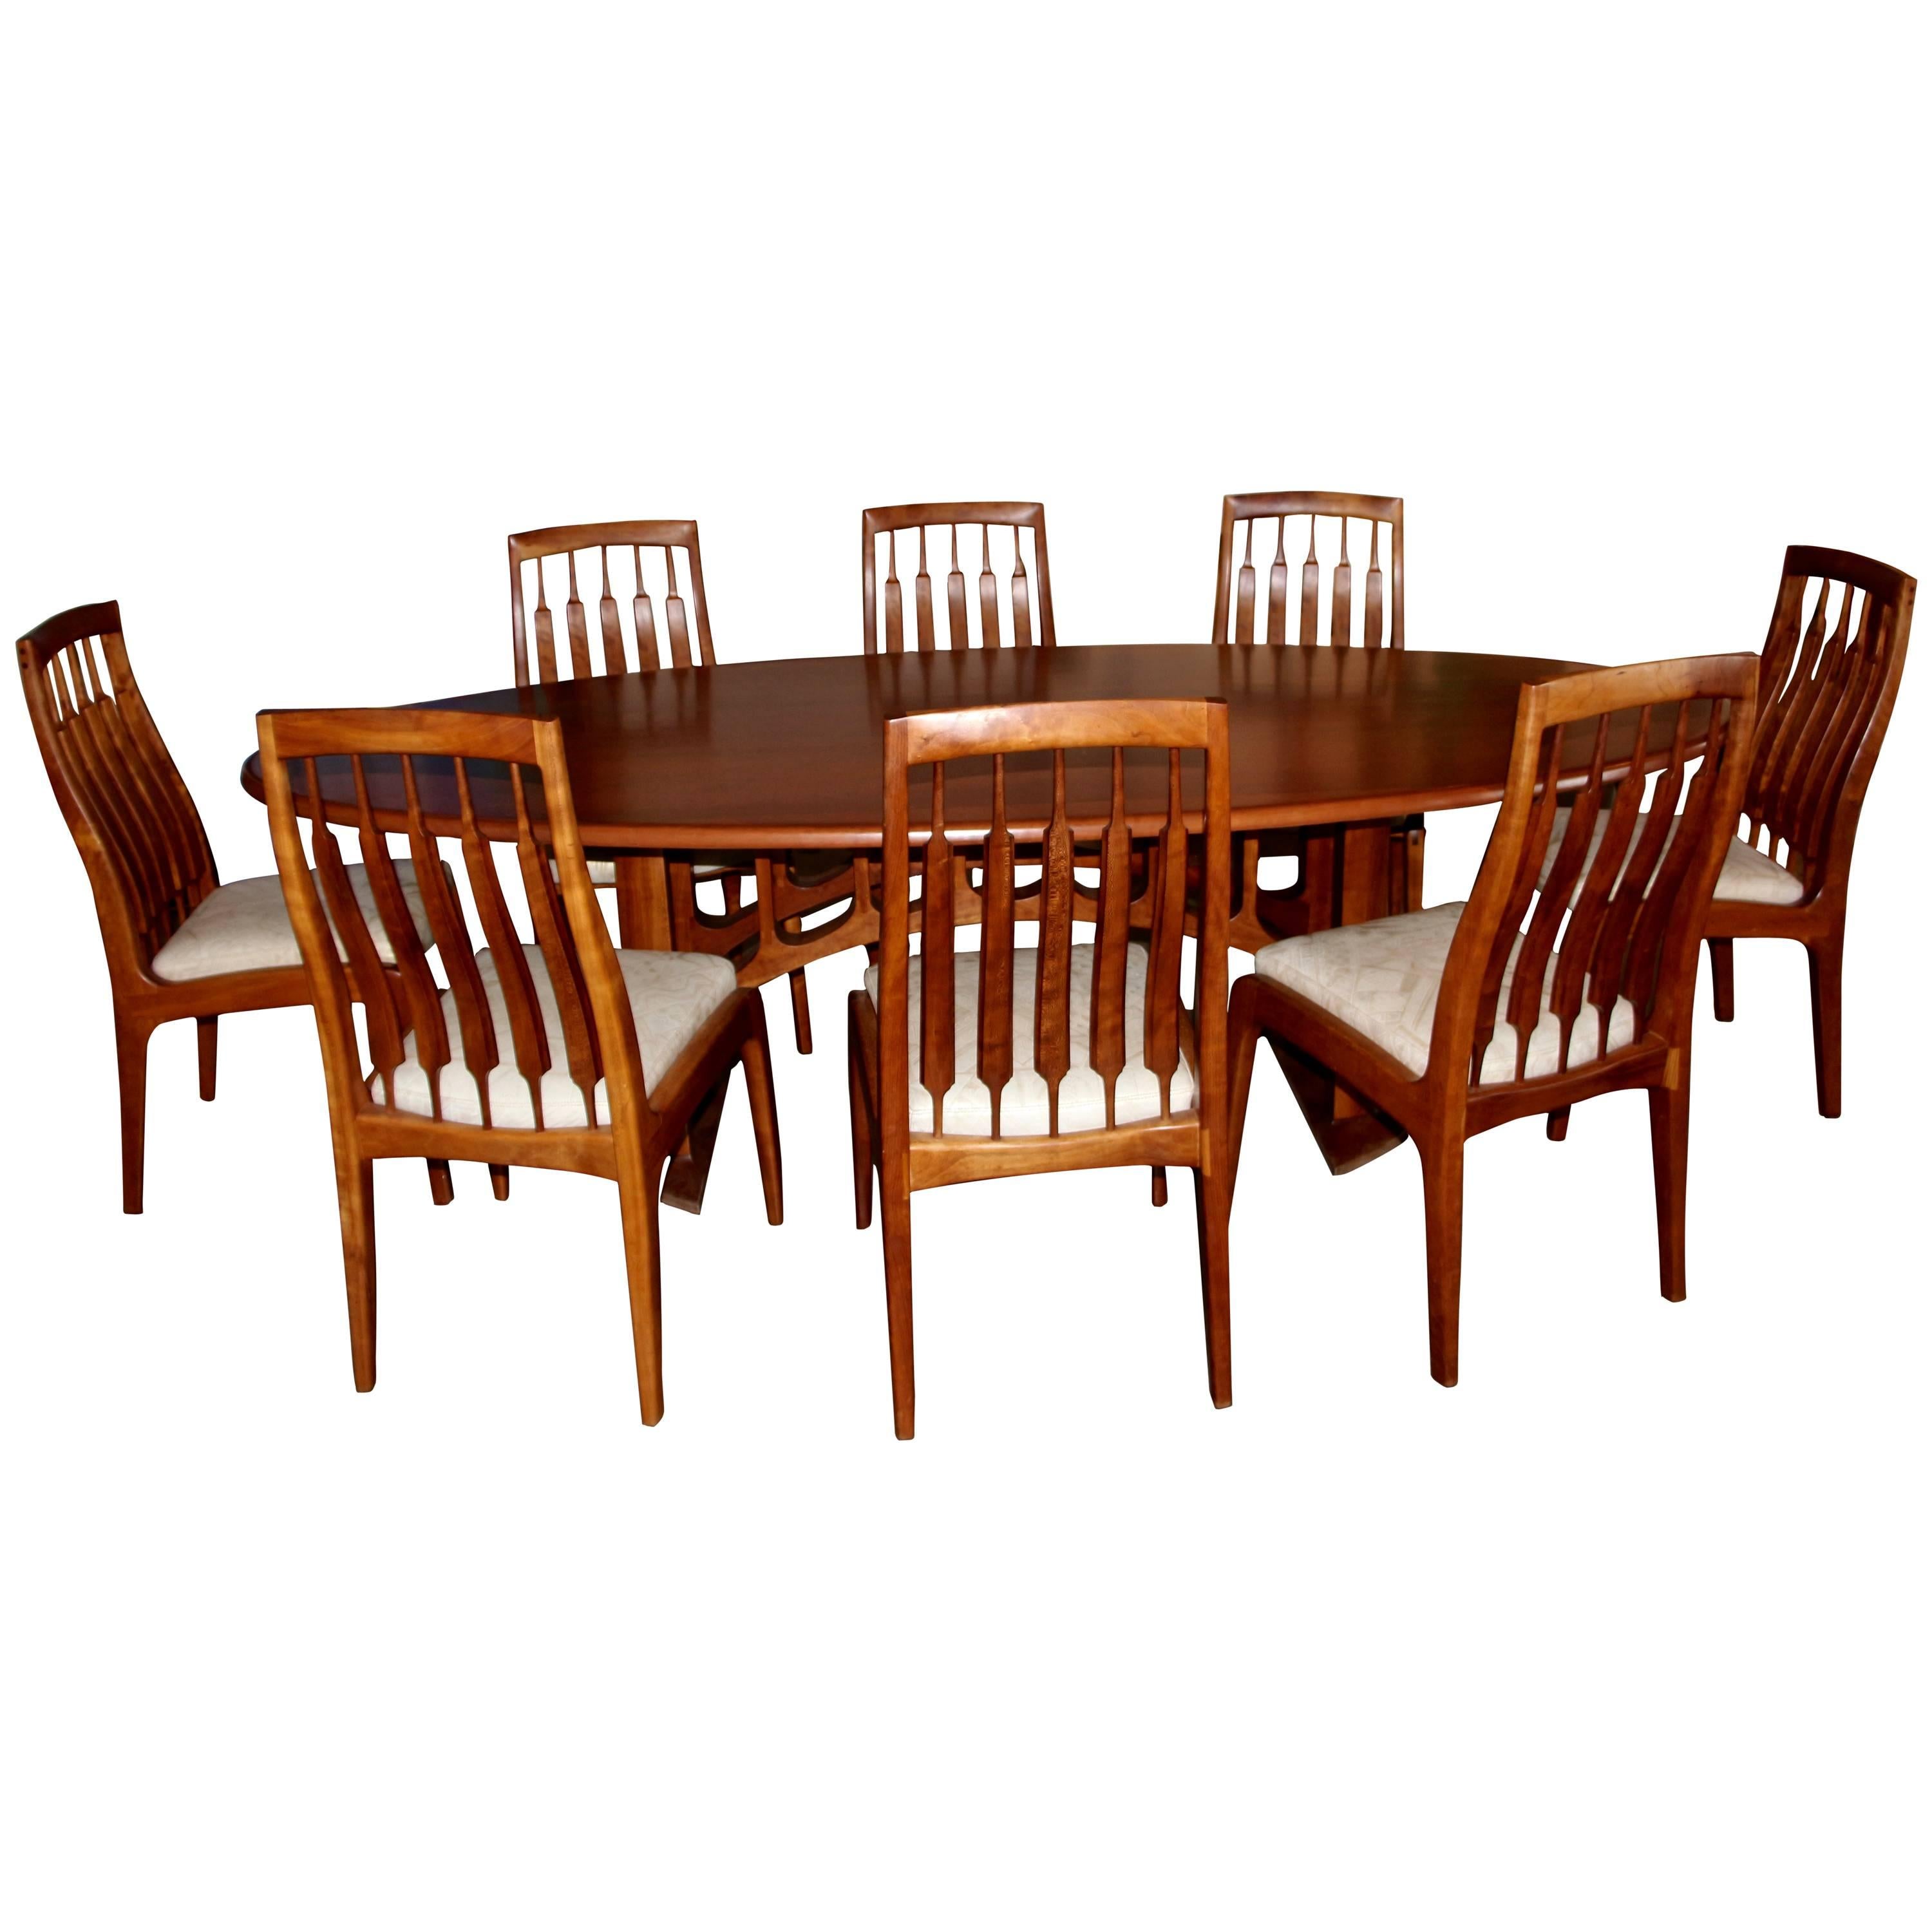 A custom-made sculptural dining table with eight chairs custom-made by the noted California Craftsman Randy Bader. This table is solid wood. The chairs are dated Sept 1994. The seats are covered in hand tooled leather. This is a spectacular dining